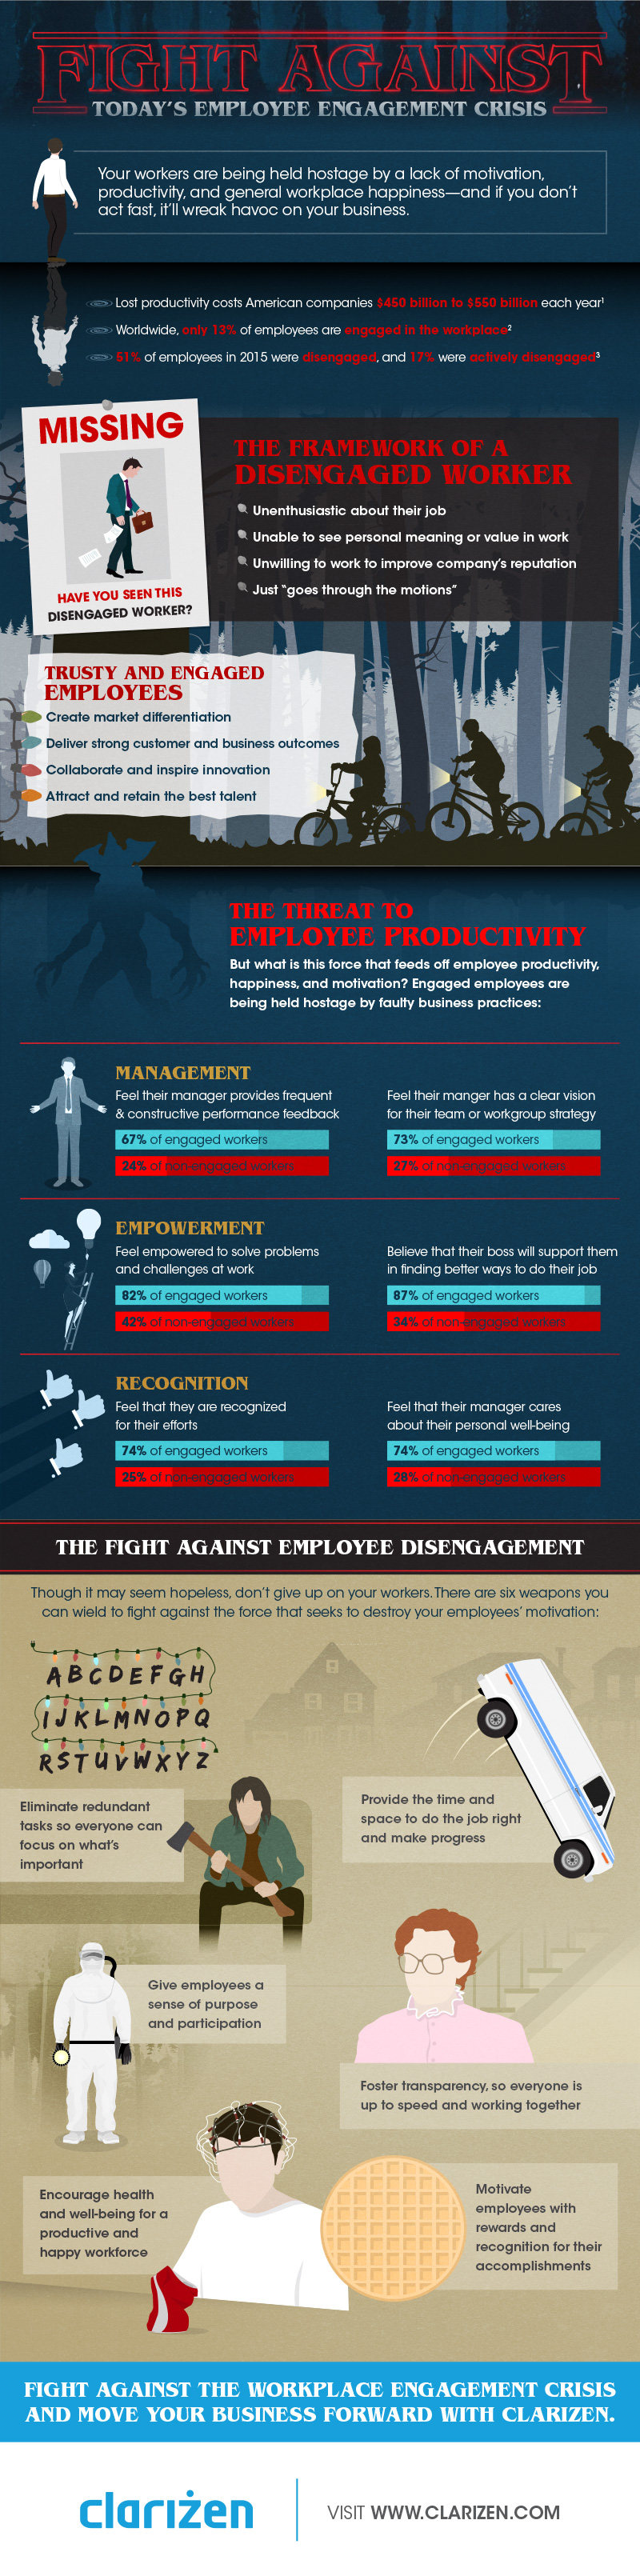 Employee engagement crisis infographic by Clarizen